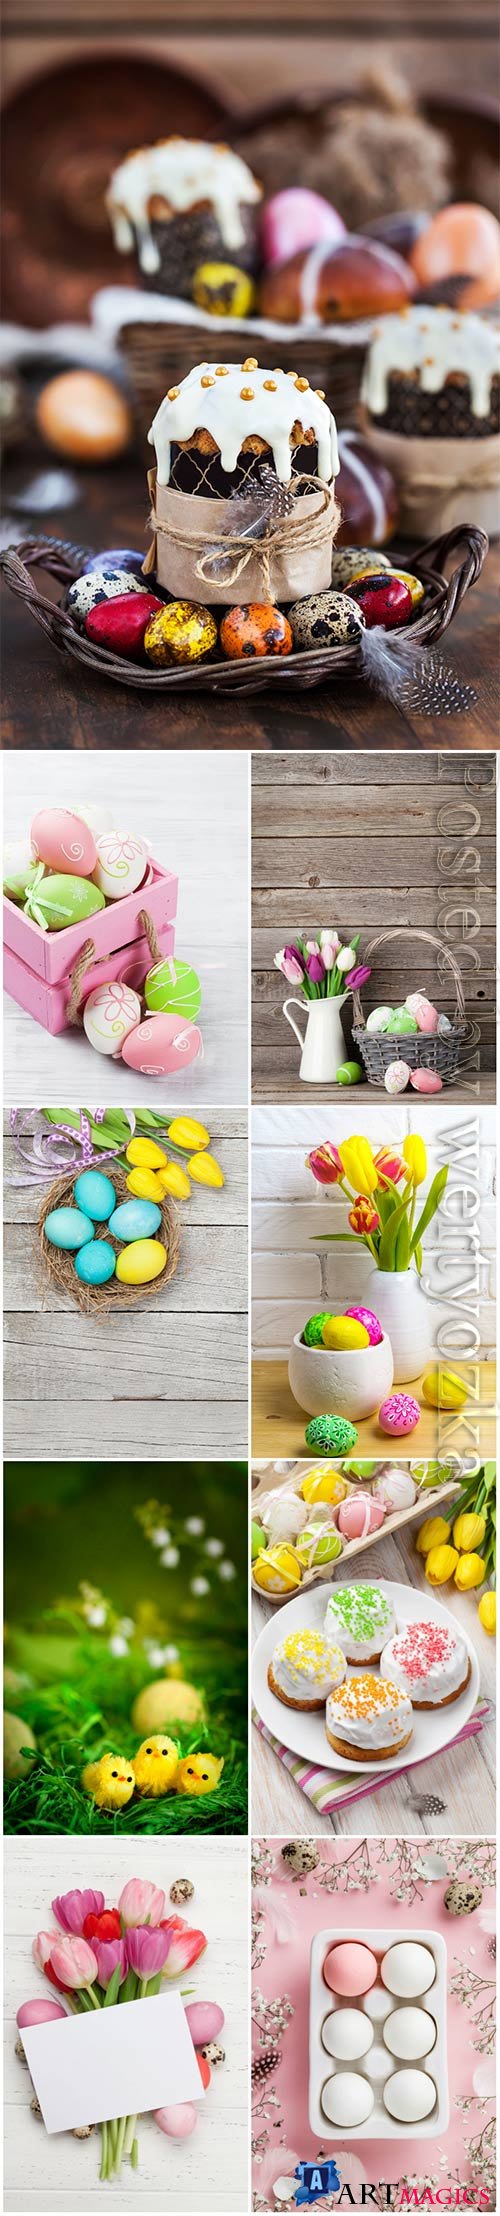 Happy Easter stock photo, Easter eggs, spring flowers # 11